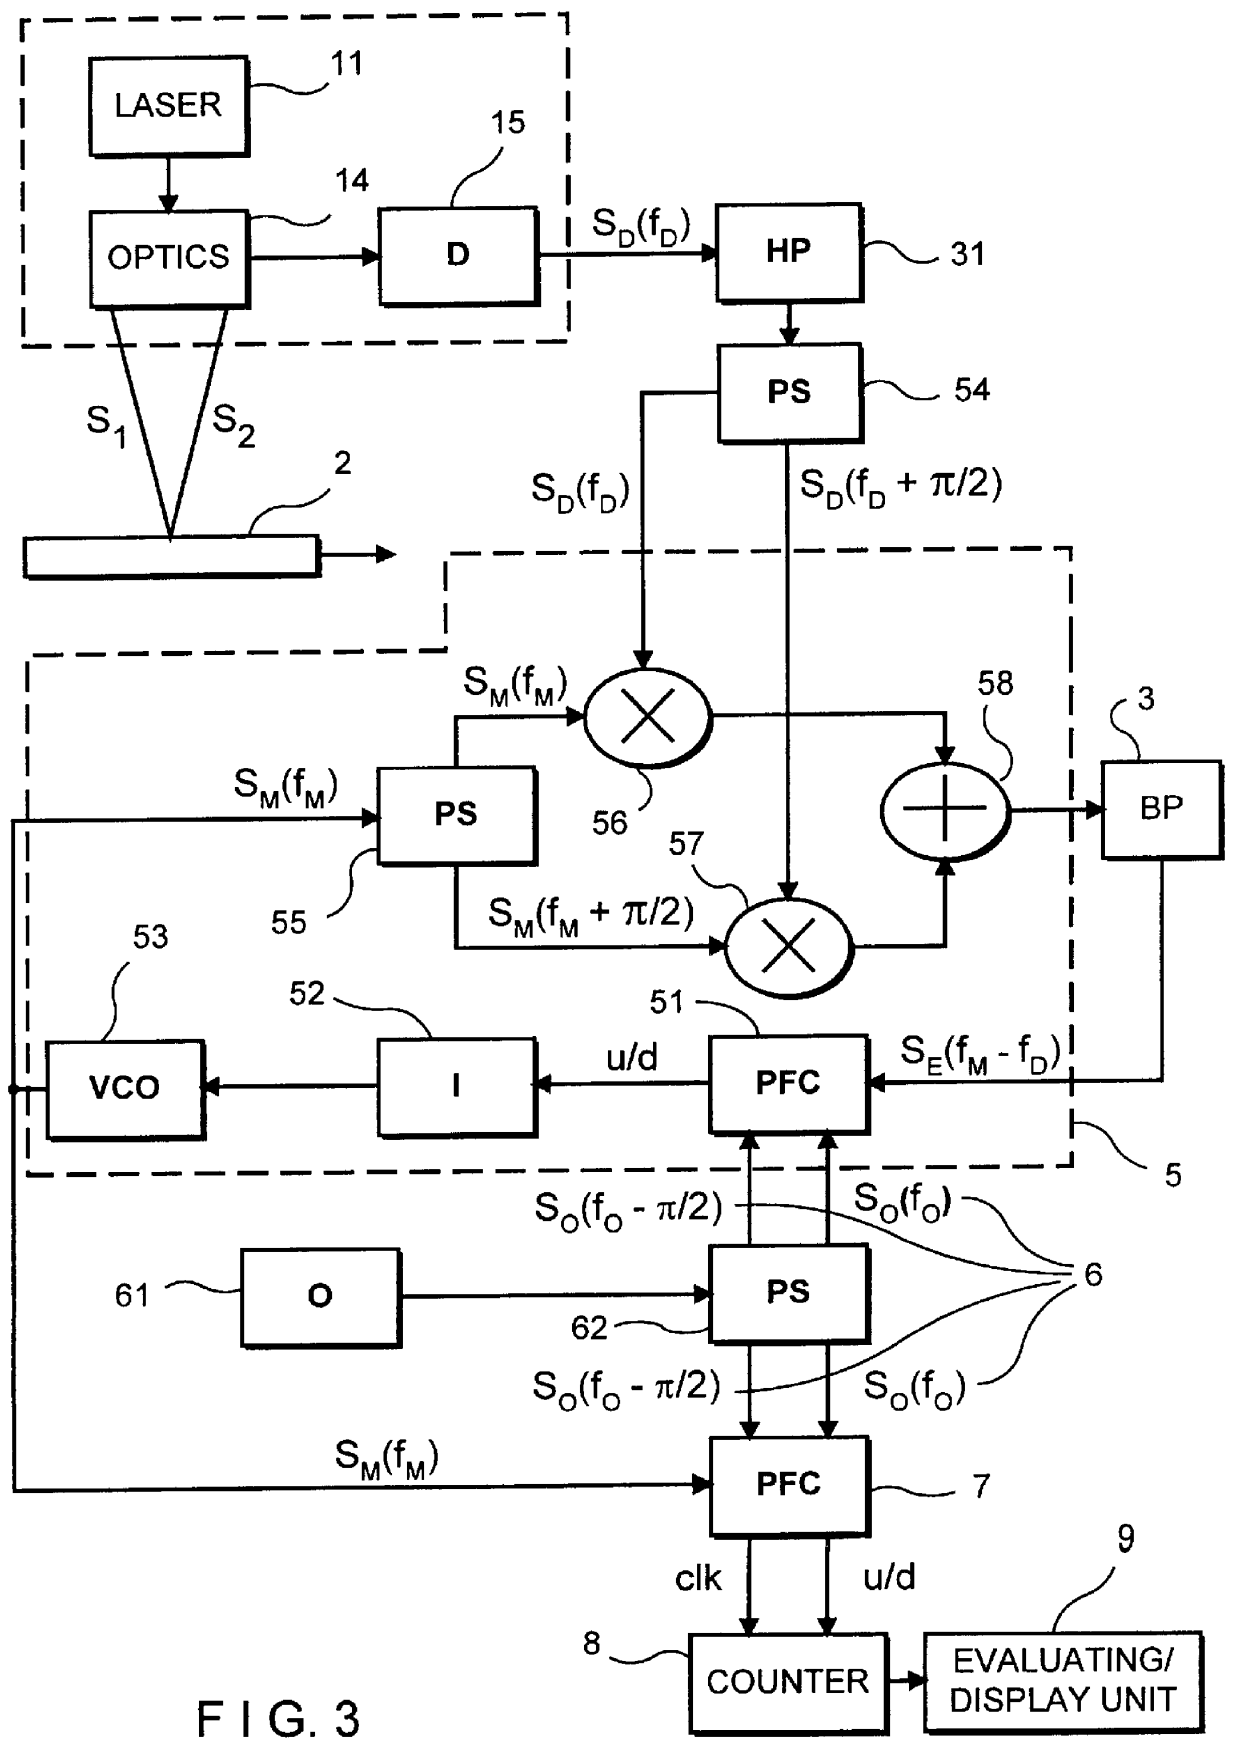 Process and arrangement for the evaluation of laser doppler signals